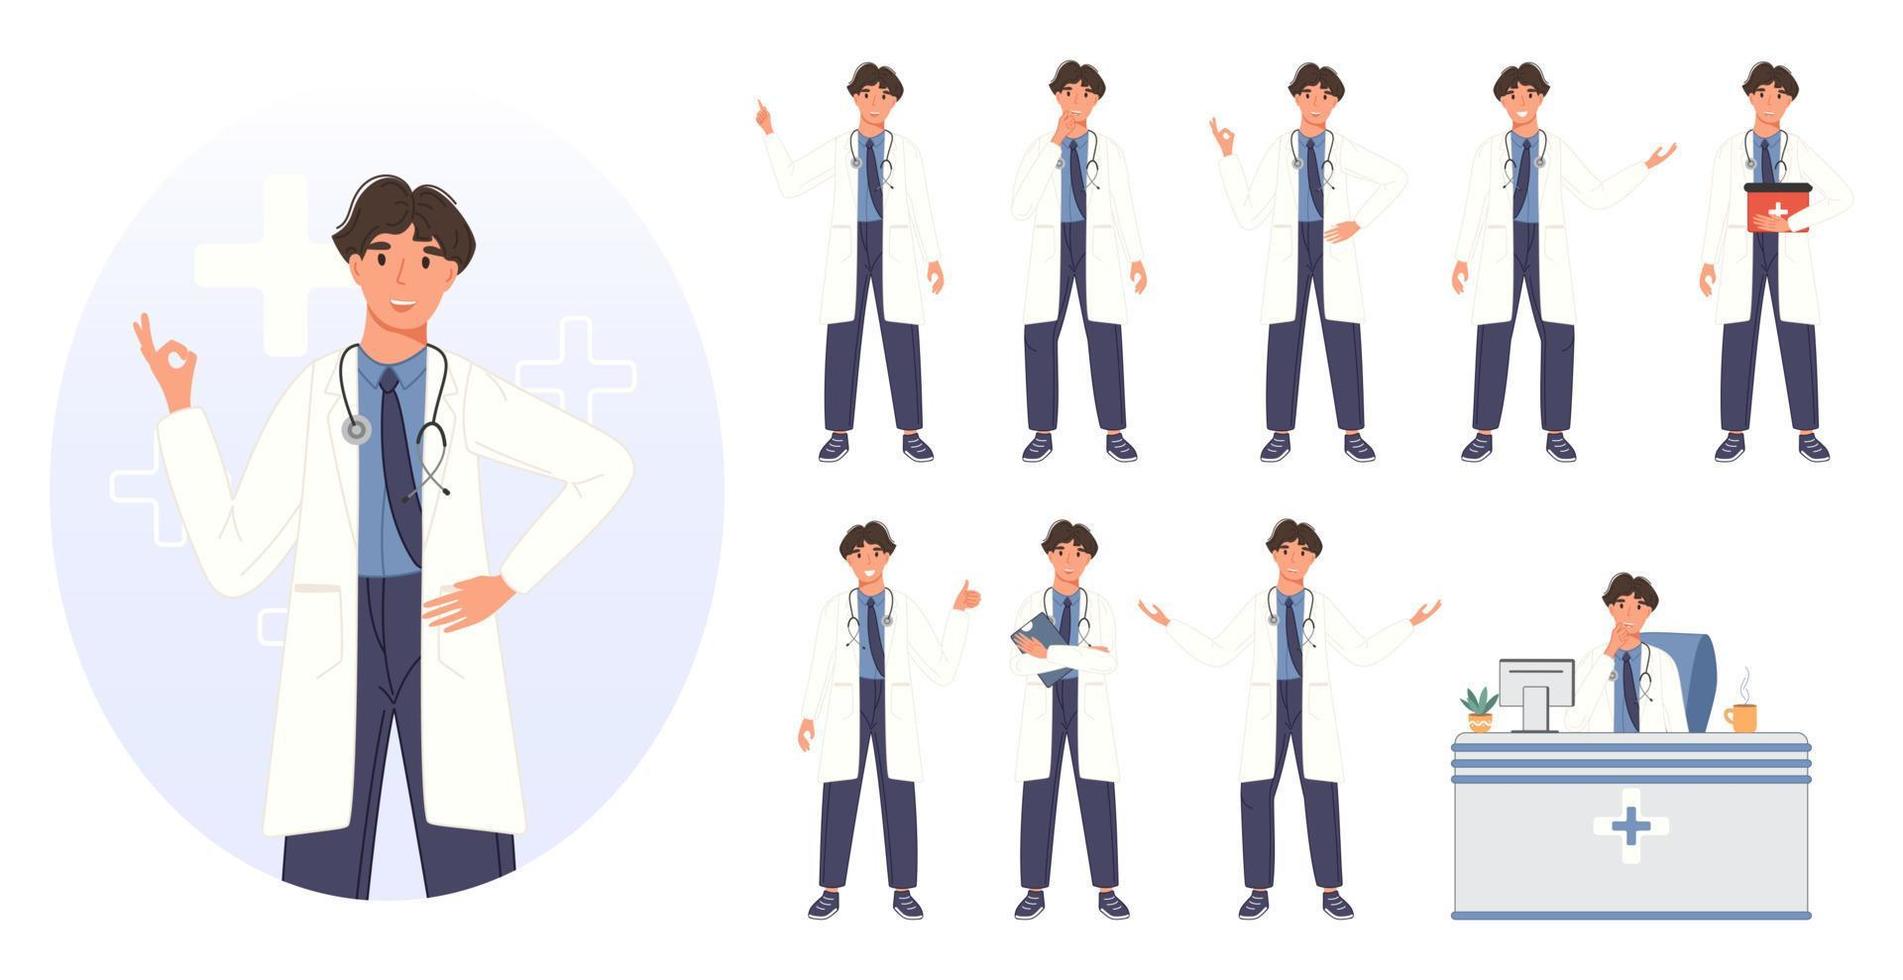 Frontline doctor team set. Medical staff man characters. Vector illustration in a flat style